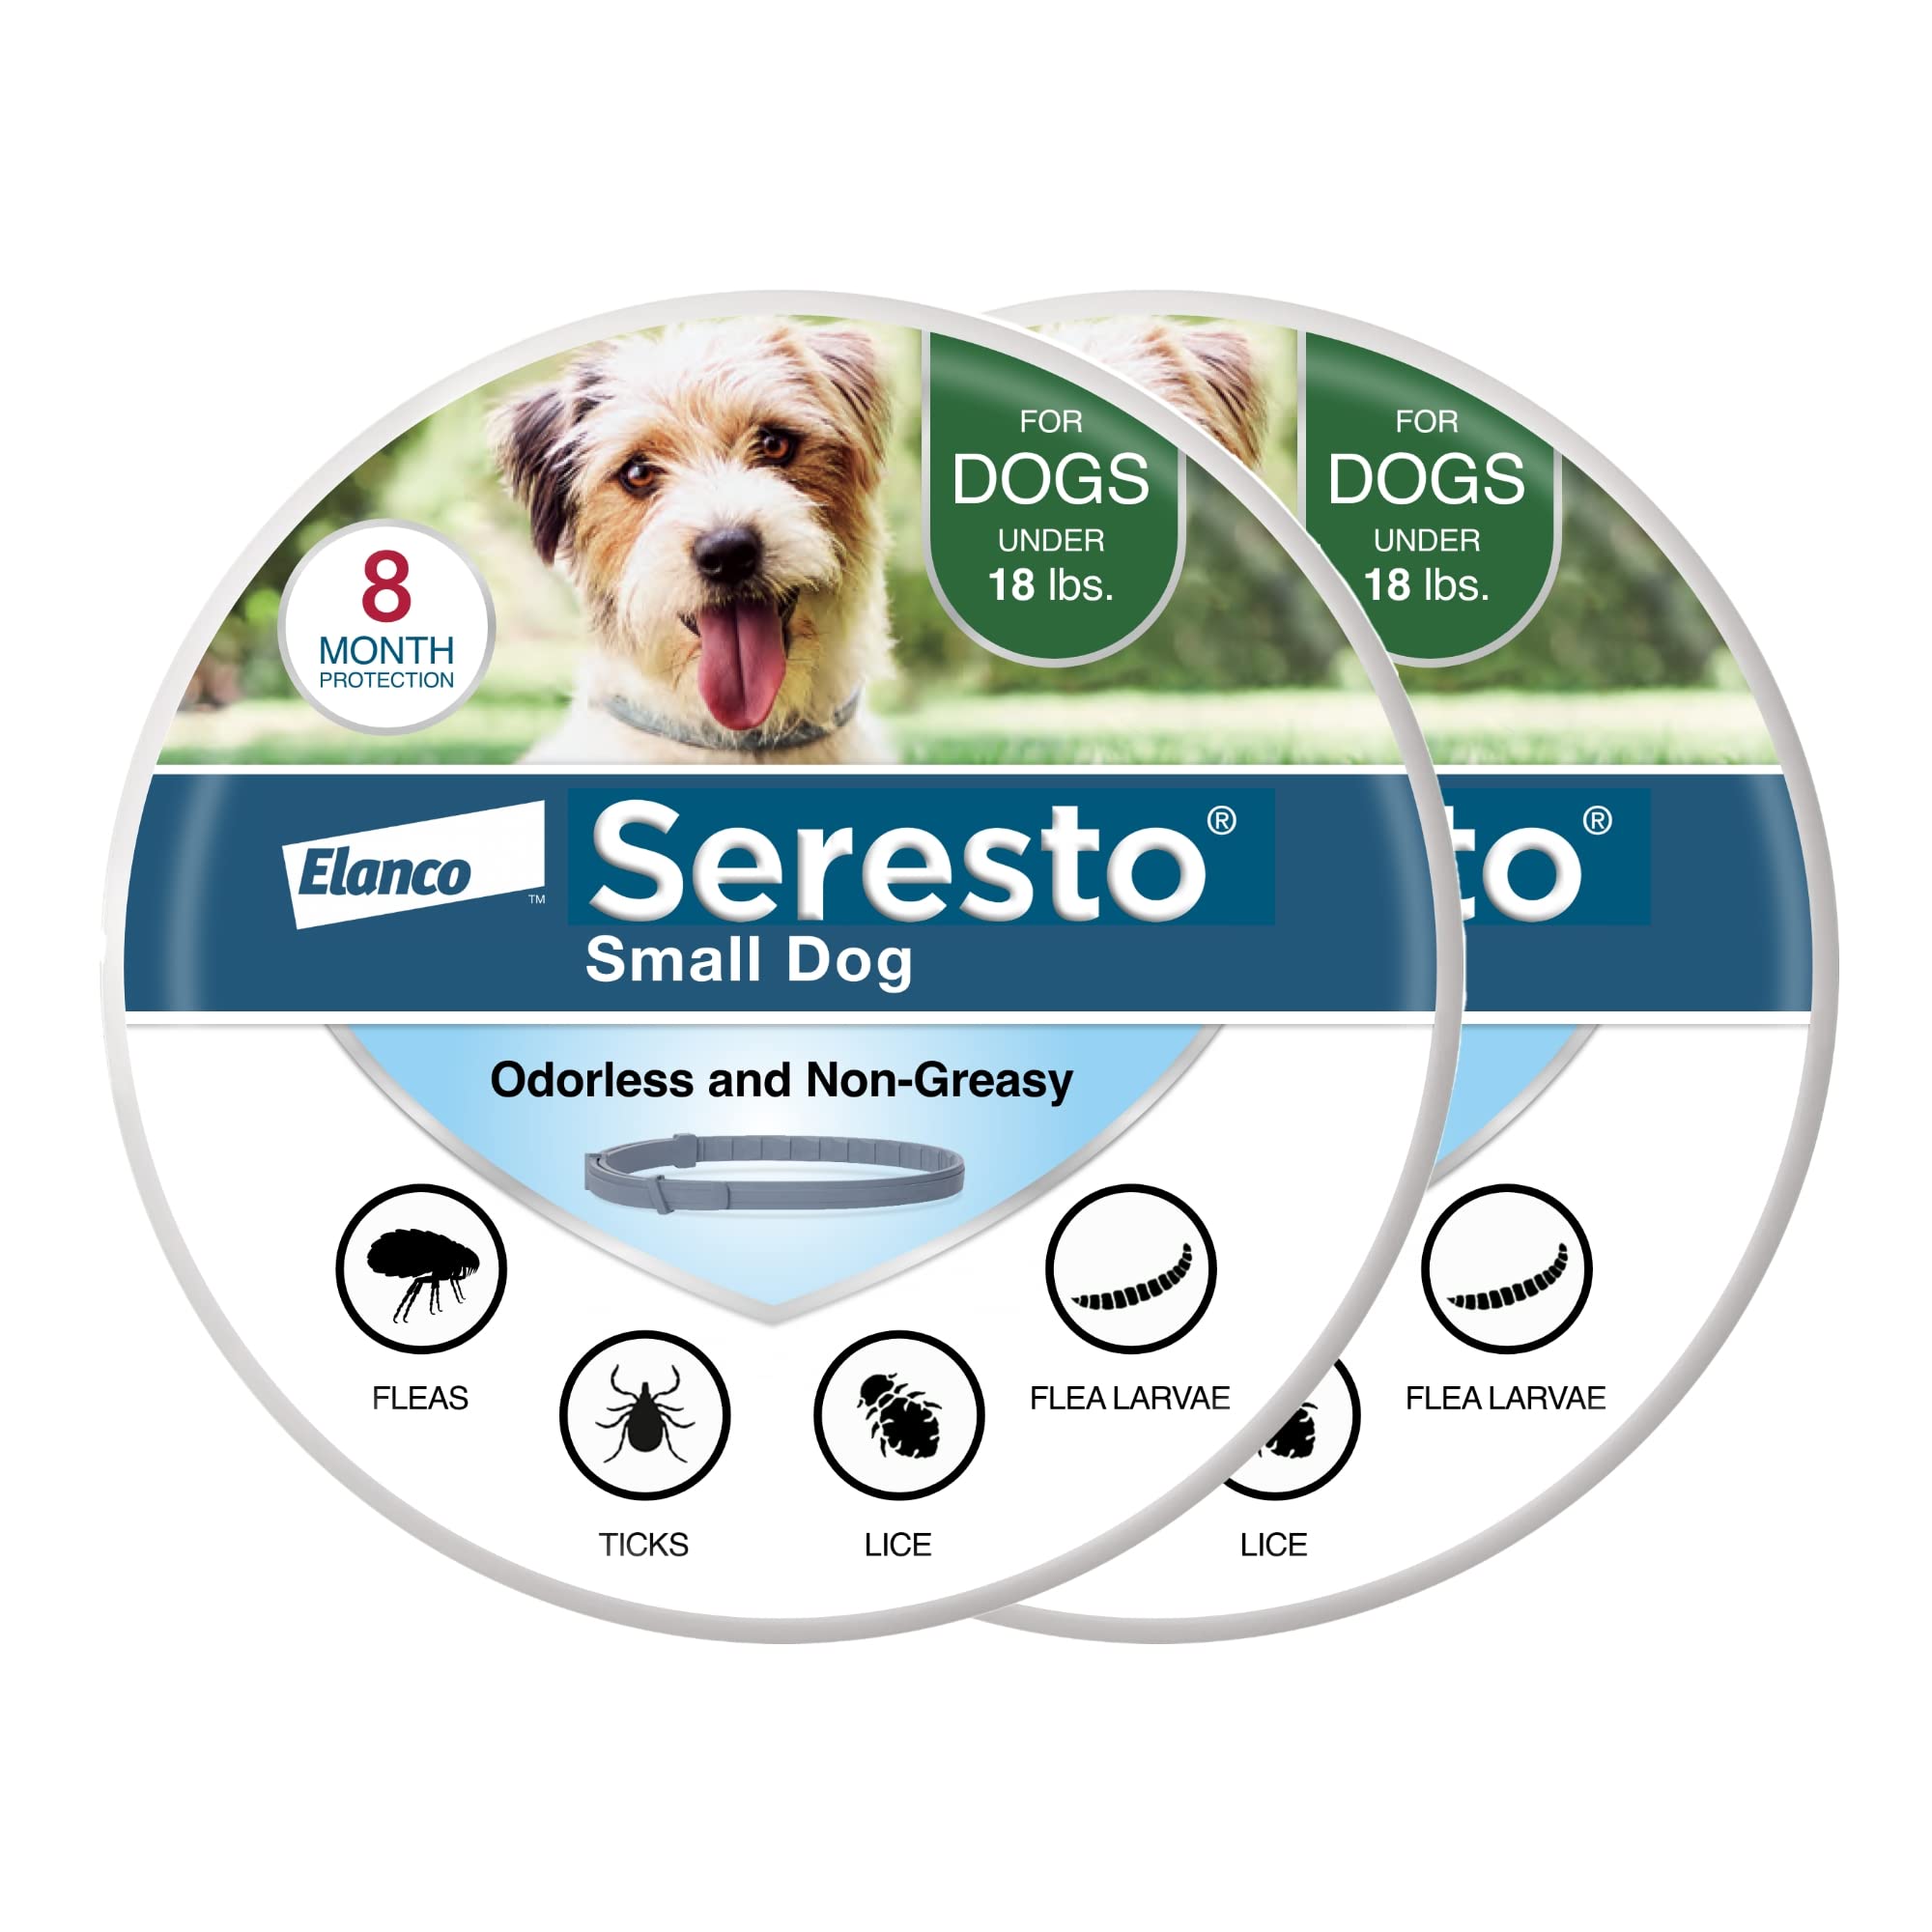 Seresto Small Dog Vet-Recommended Flea & Tick Treatment & Prevention Collar for Dogs Under 18 lbs. | 2-Pack